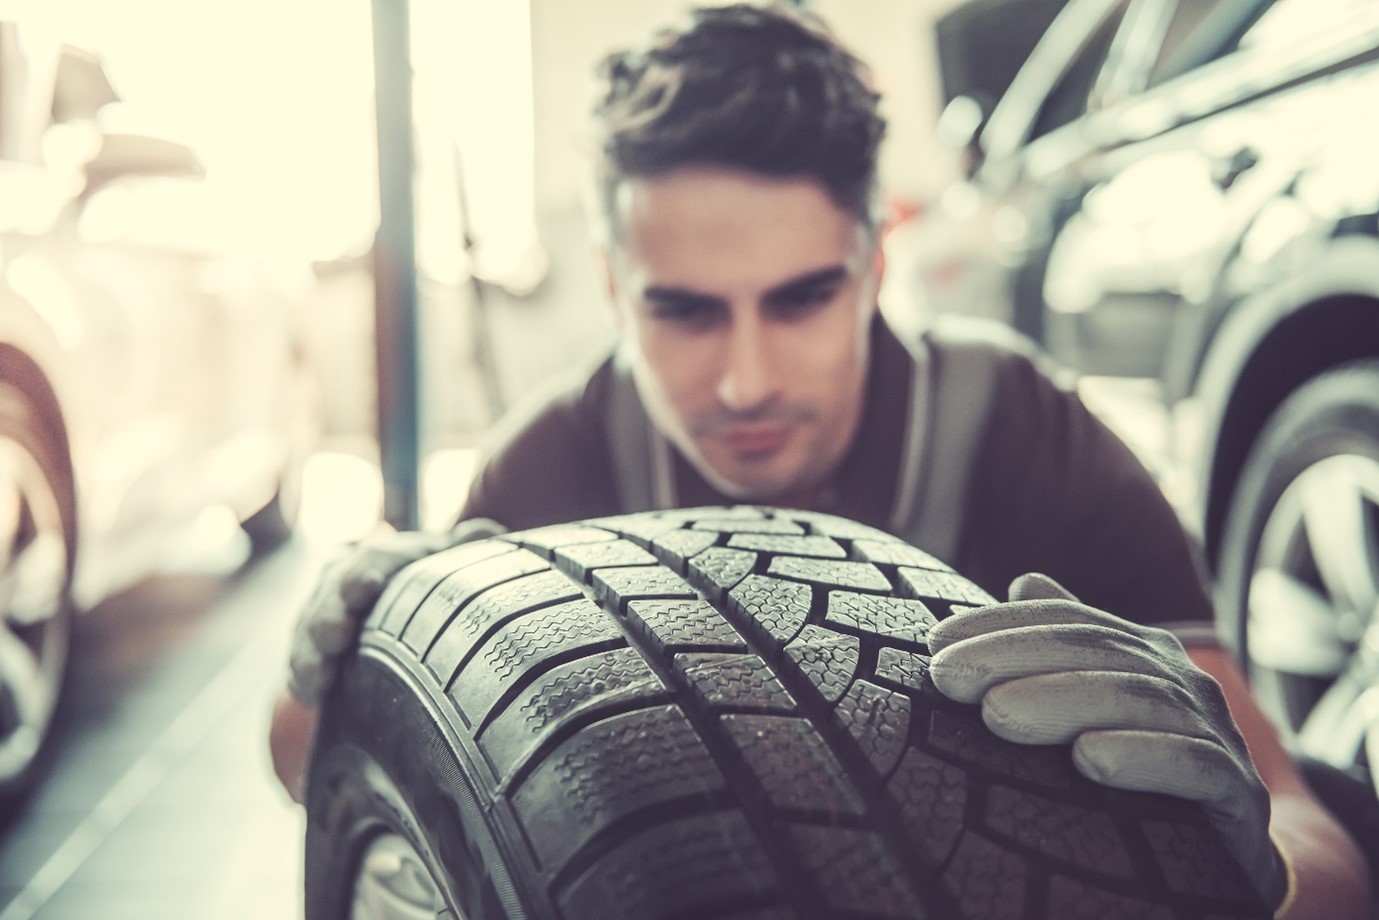 Worn tyres – more dangerous than we think?